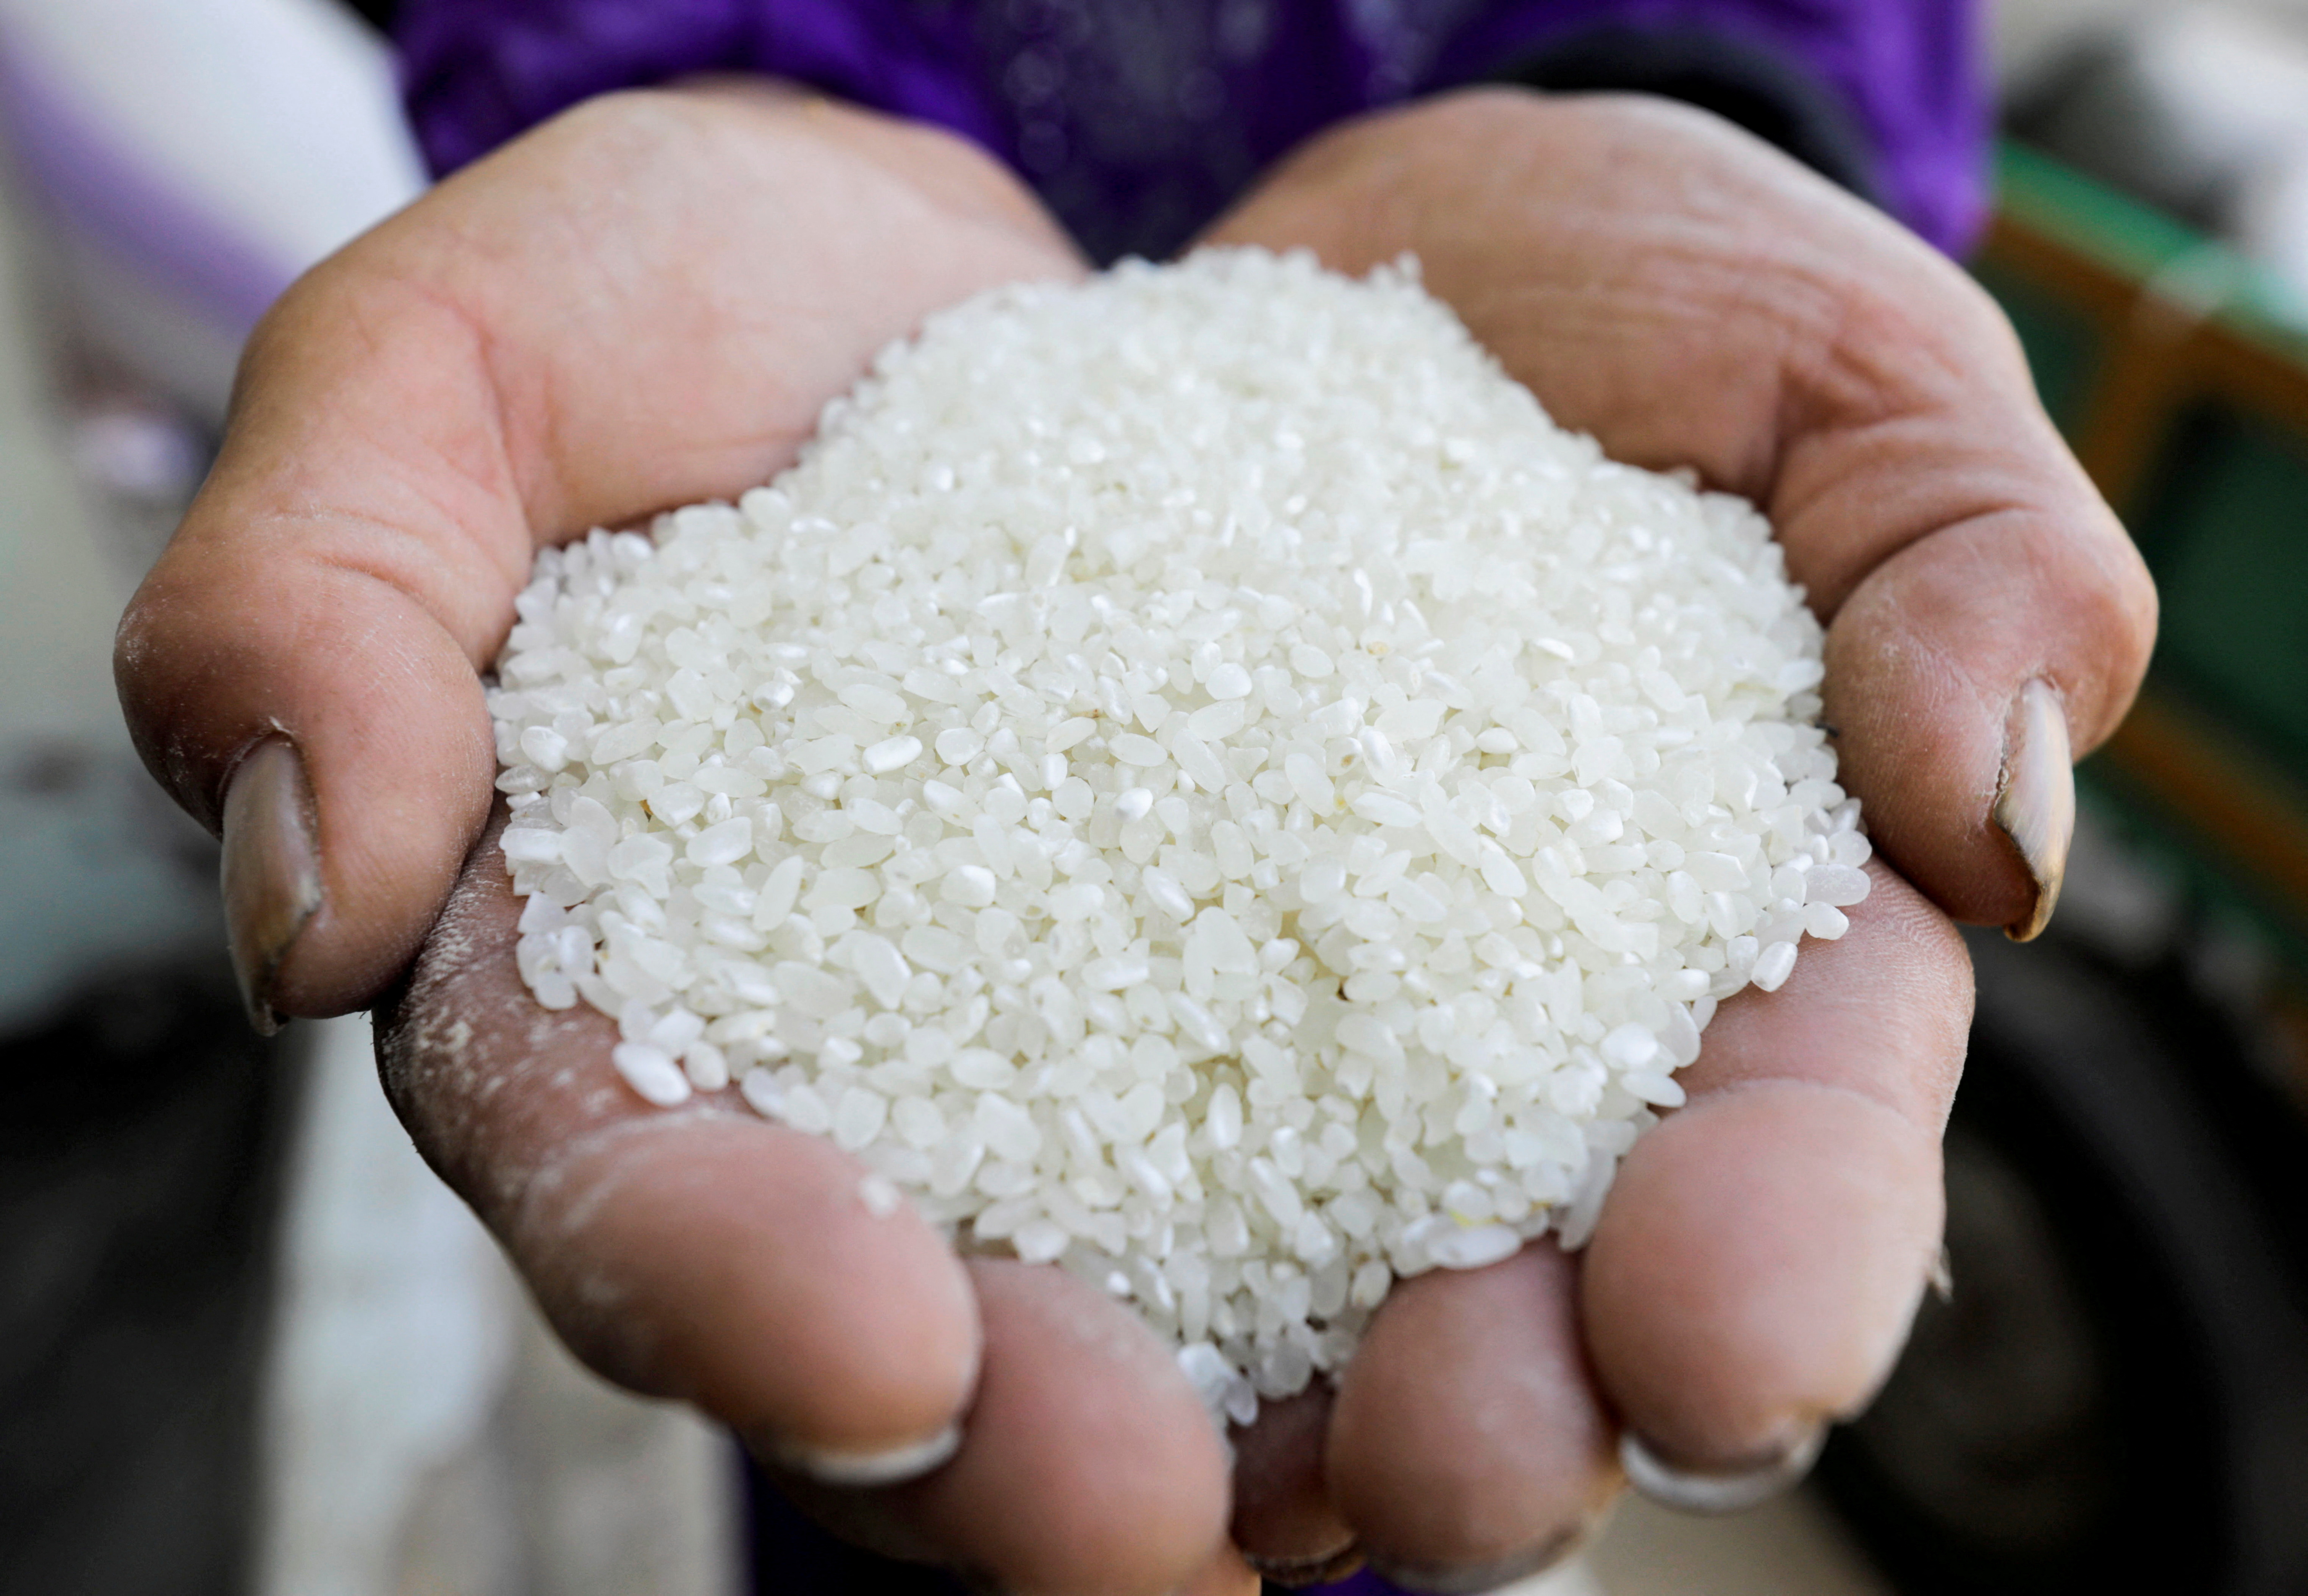 A farmer shows rice grains after harvesting it from a field in the province of Al-Sharkia